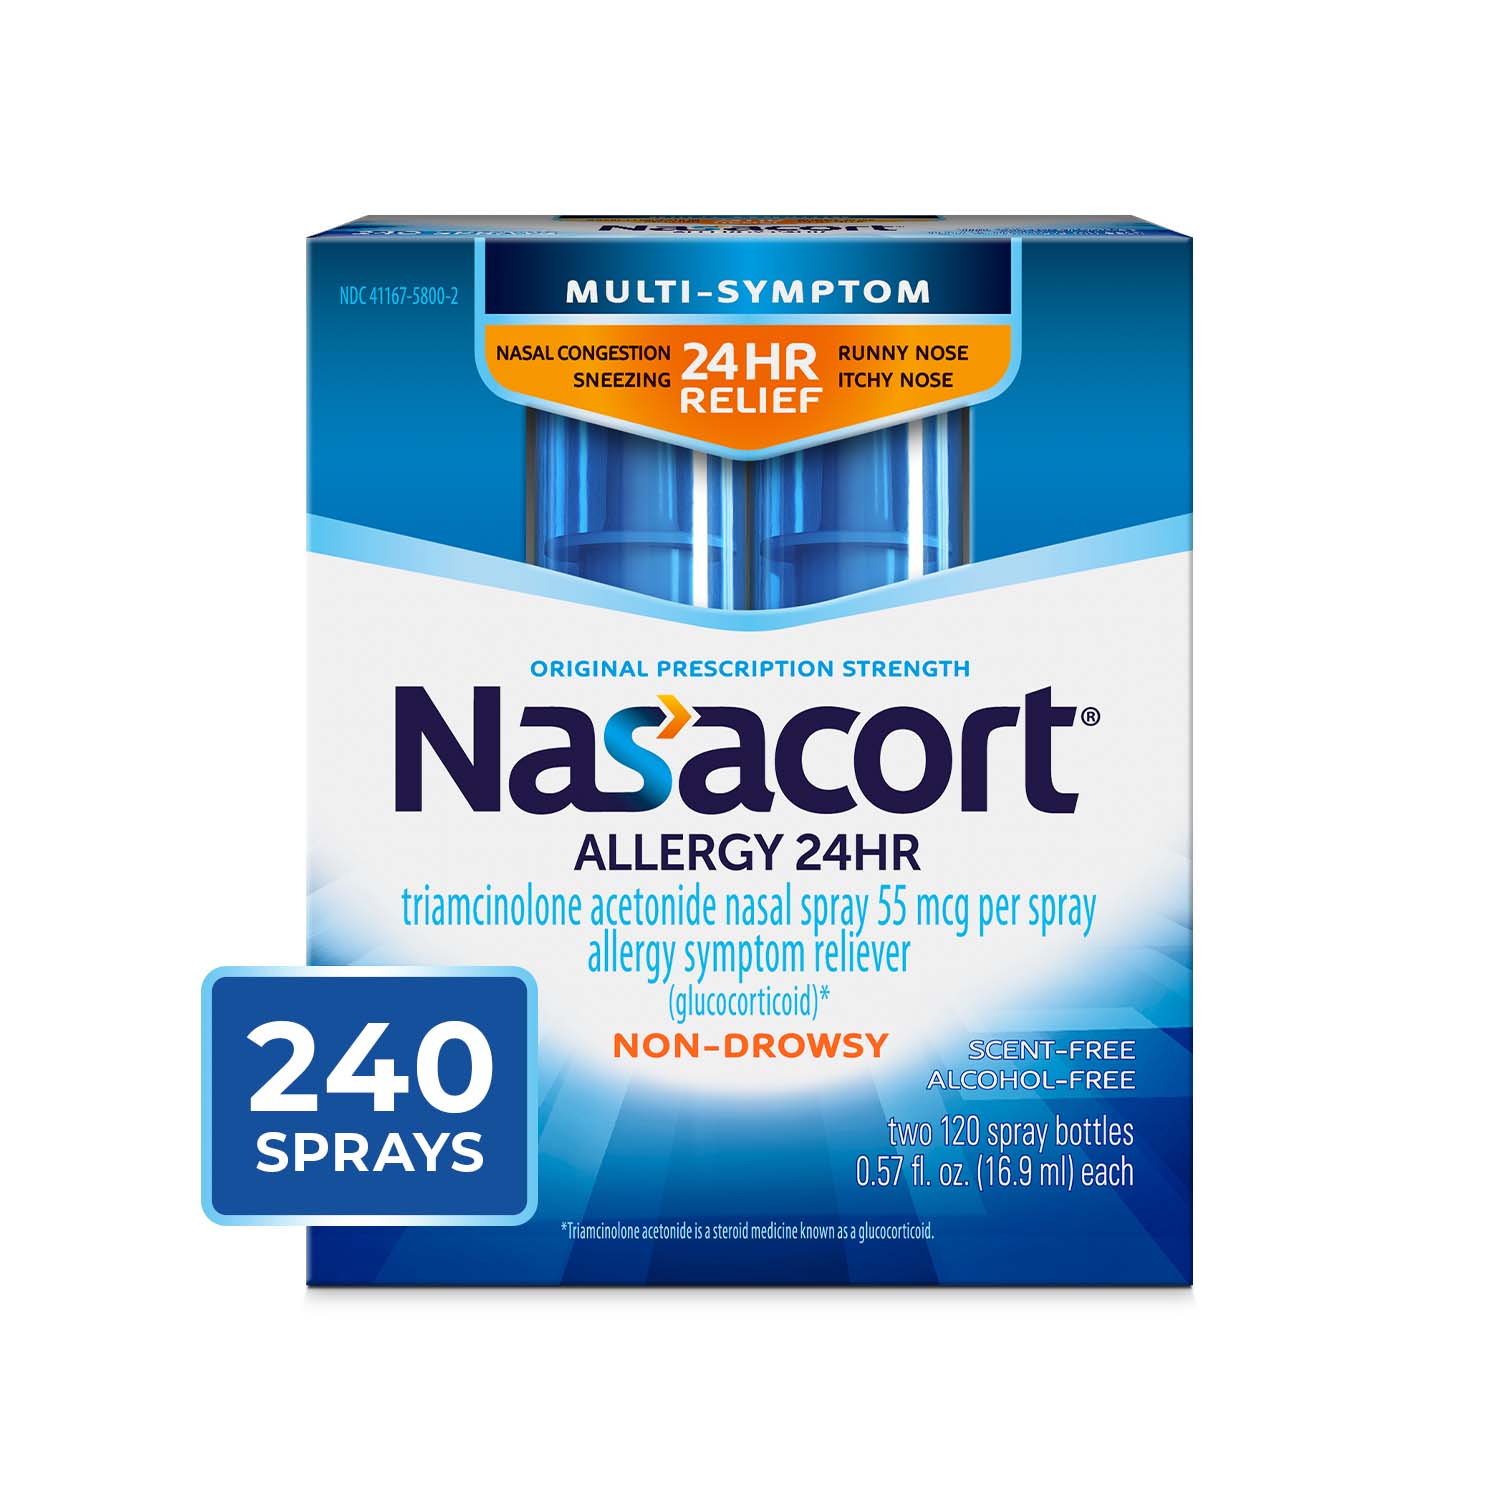 Nasacort 24HR Allergy Nasal Spray for Adults, Non-drowsy & Alcohol Free, 120 Sprays, 0.57 fl.oz. 2pk - image 1 of 9